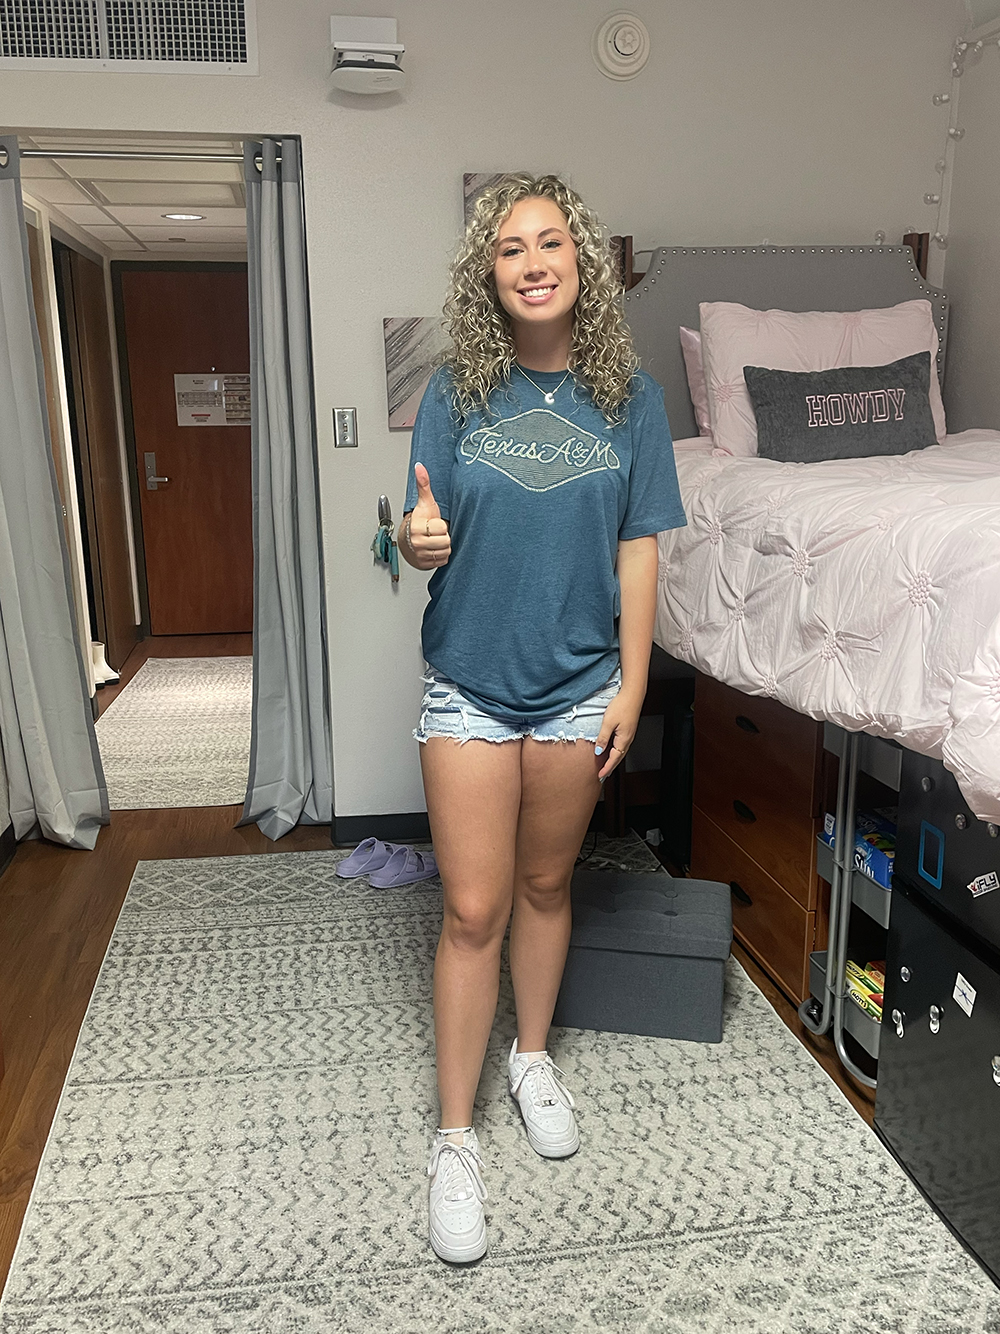 A female student gives a thumbs up while standing in her dorm room